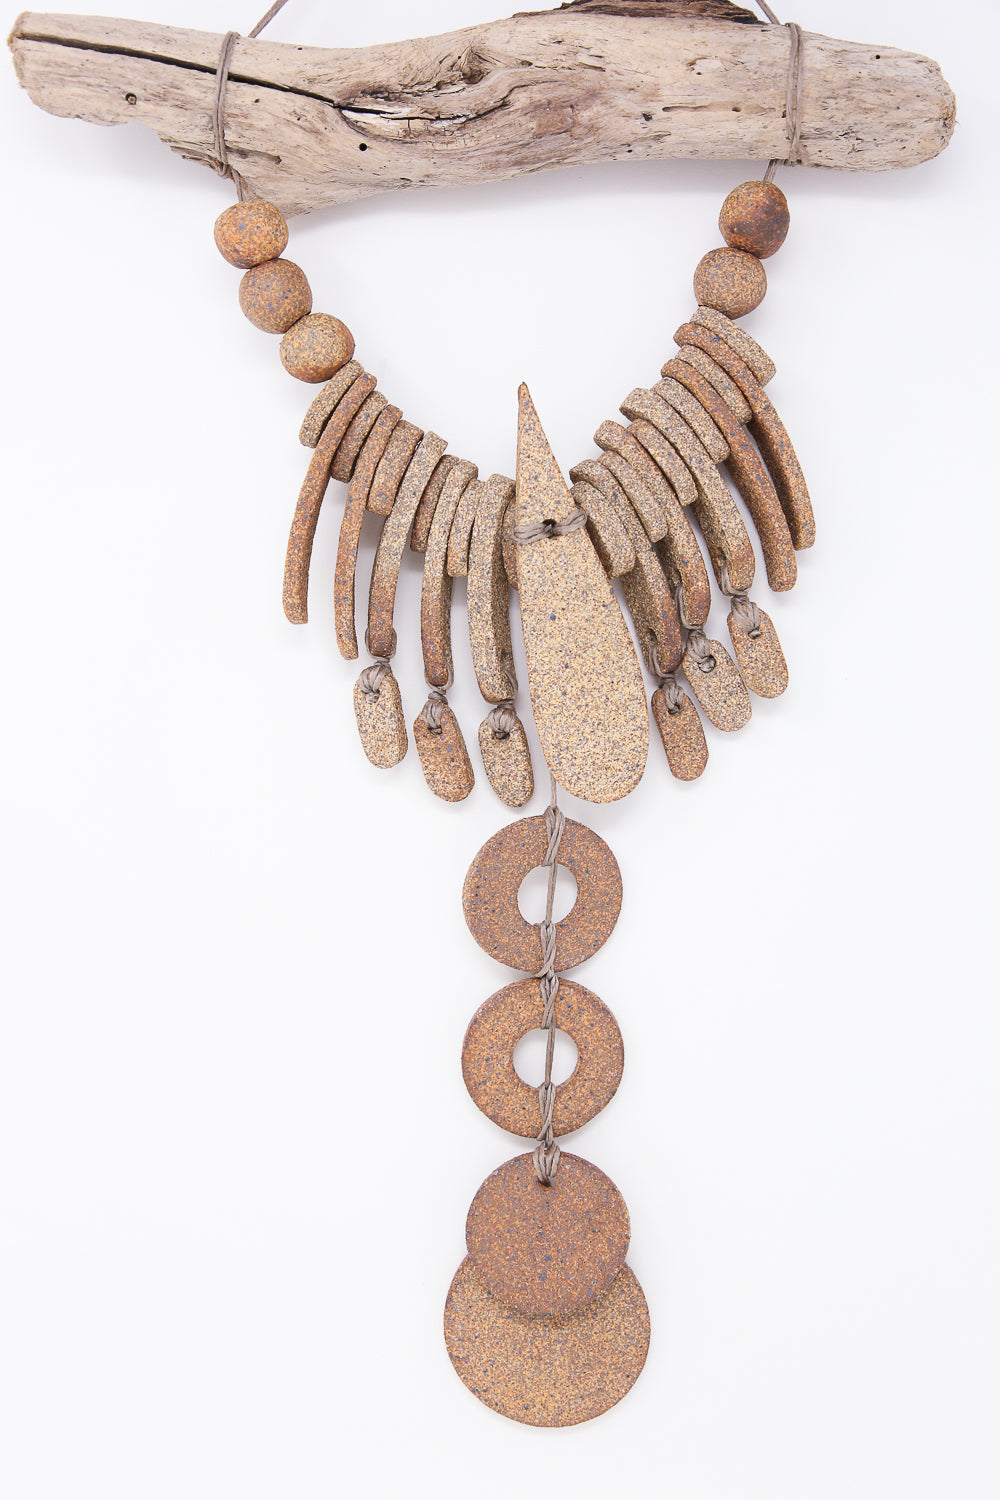 Heather Levine Wall Hanging - Teardrops With Circles in Mixed Brown detail